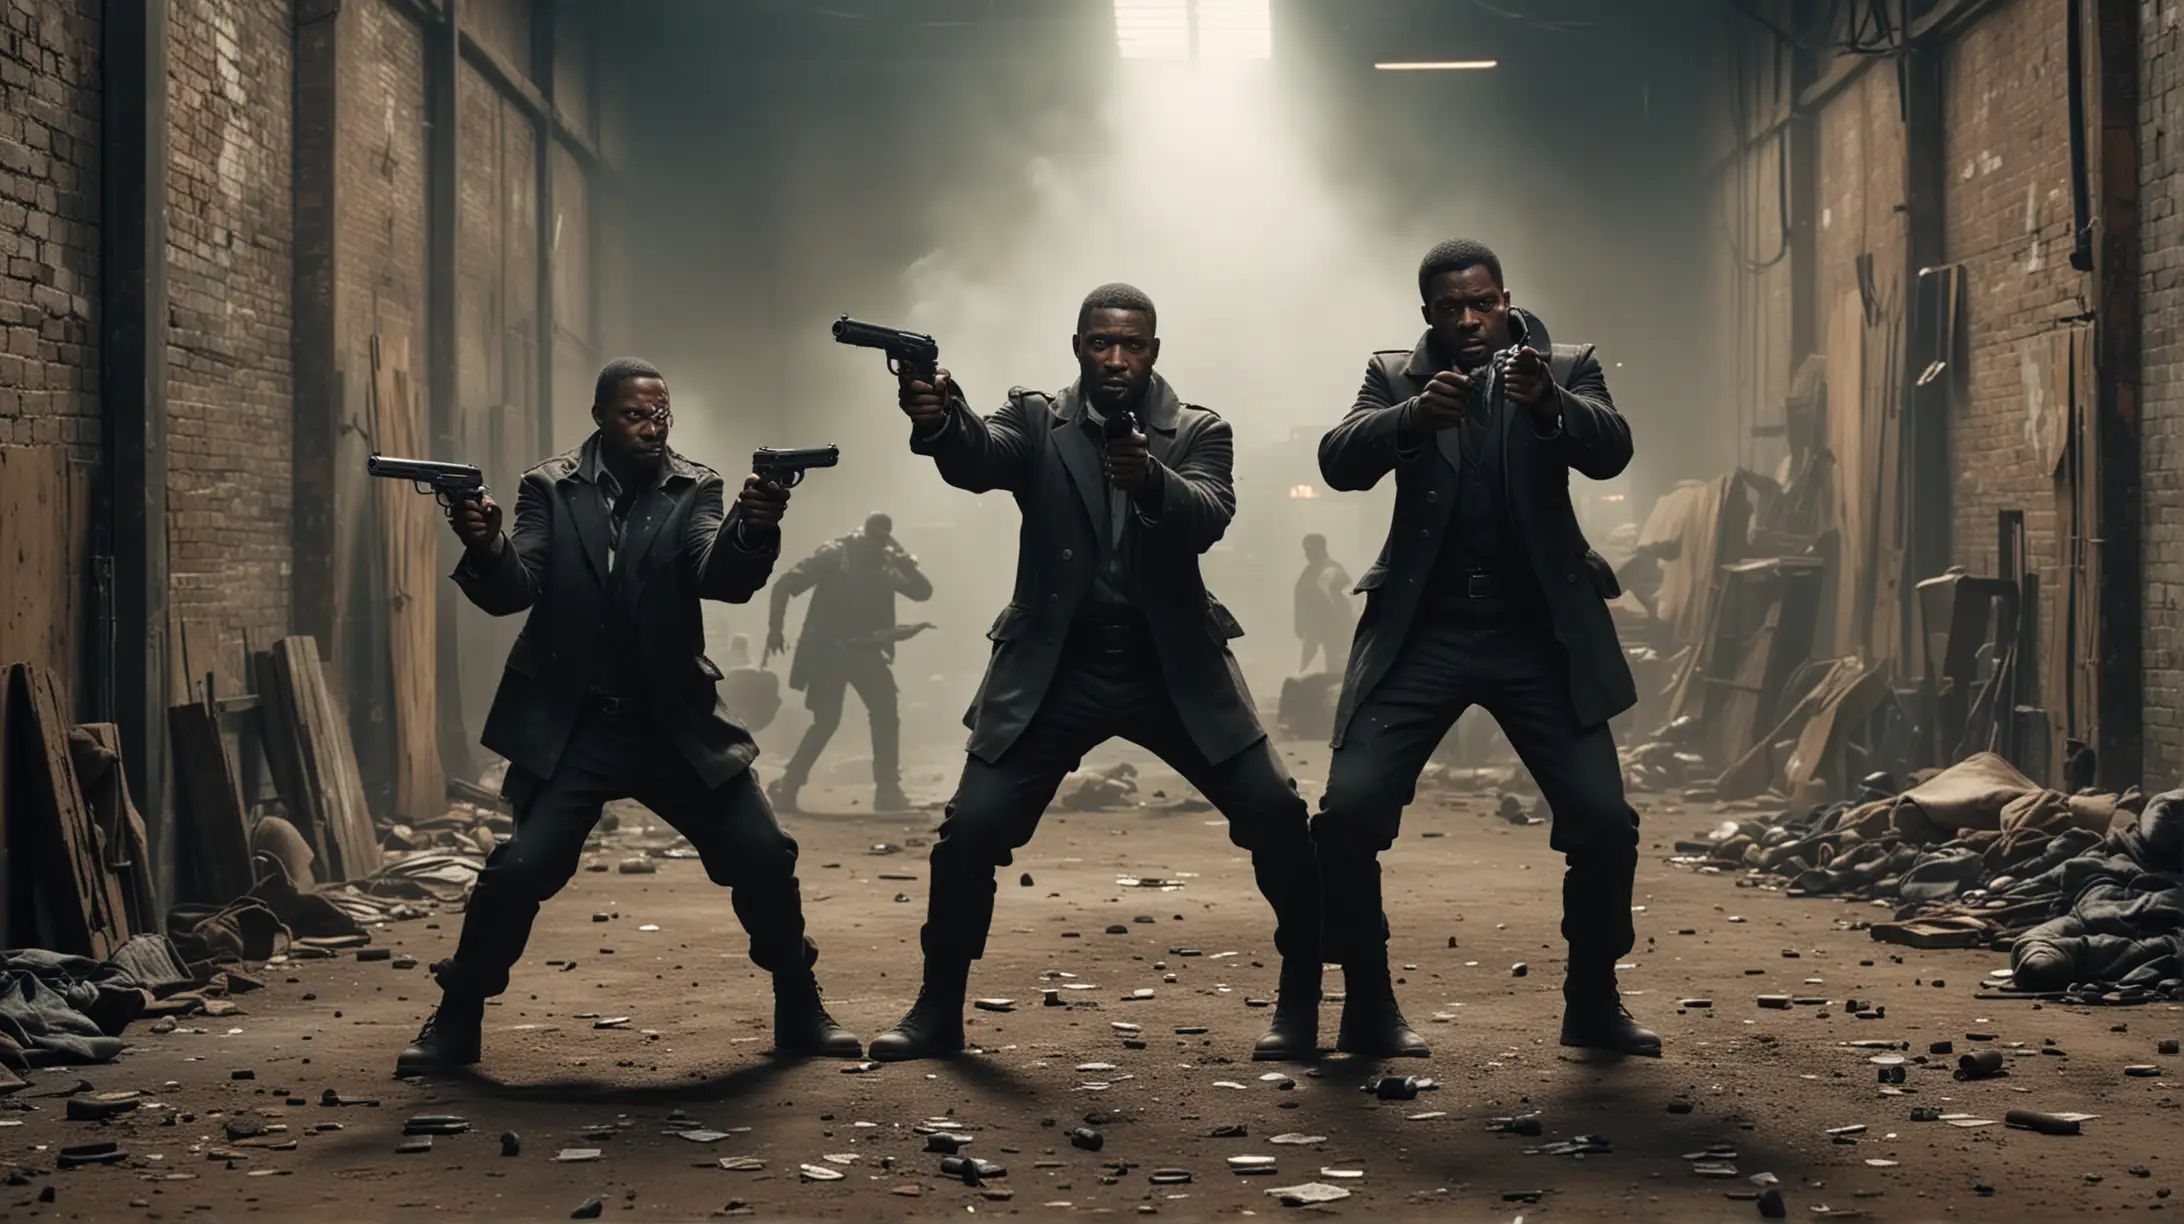 Generate a cinematic image of three black henchmen pointing guns at each other in a small old warehouse. there is a body on the ground and money scattered everywhere.